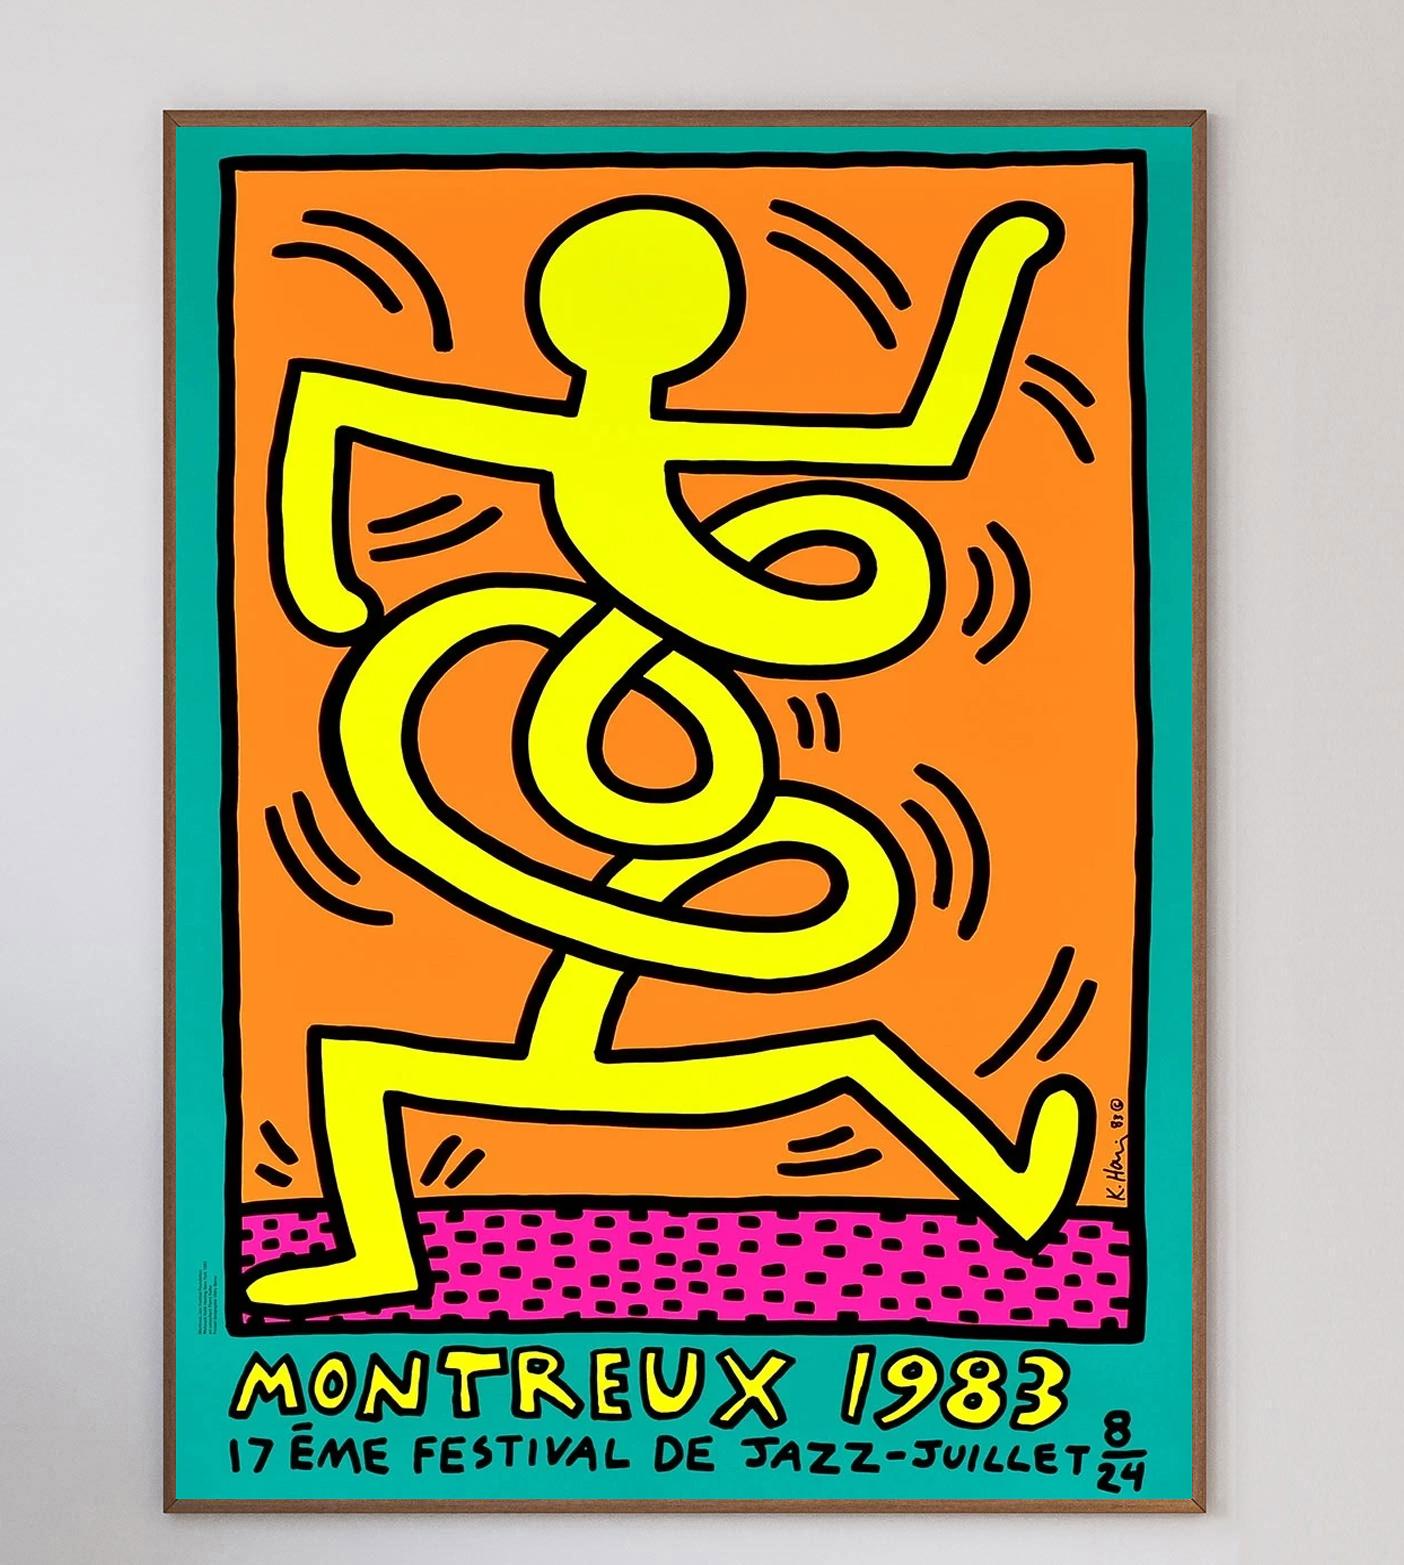 In 1983, Keith Haring was asked to create a poster for the iconic Montreux Jazz Festival, in turn, he submitted 3 designs which were instantly accepted. Haring visited Montreux for the event and spent the entire time painting and creating art around